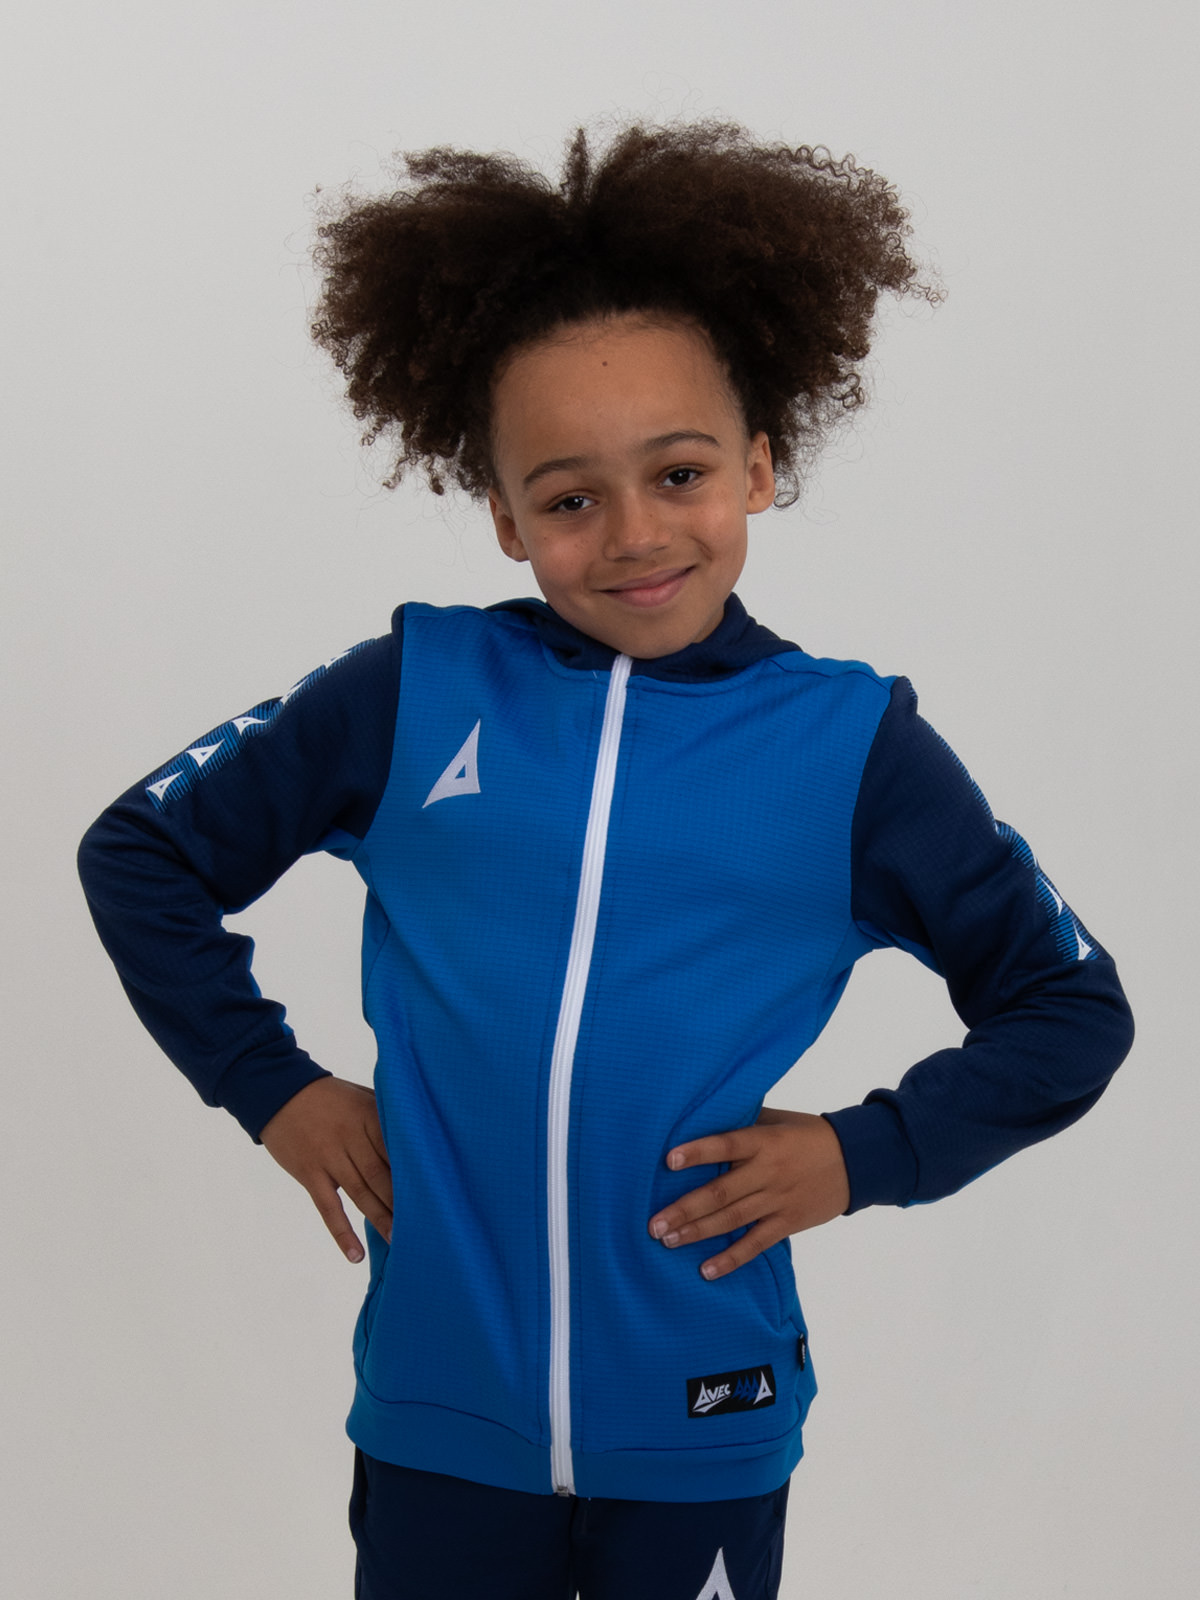 with his hands on his hips, this child is wearing a royal blue hoody.